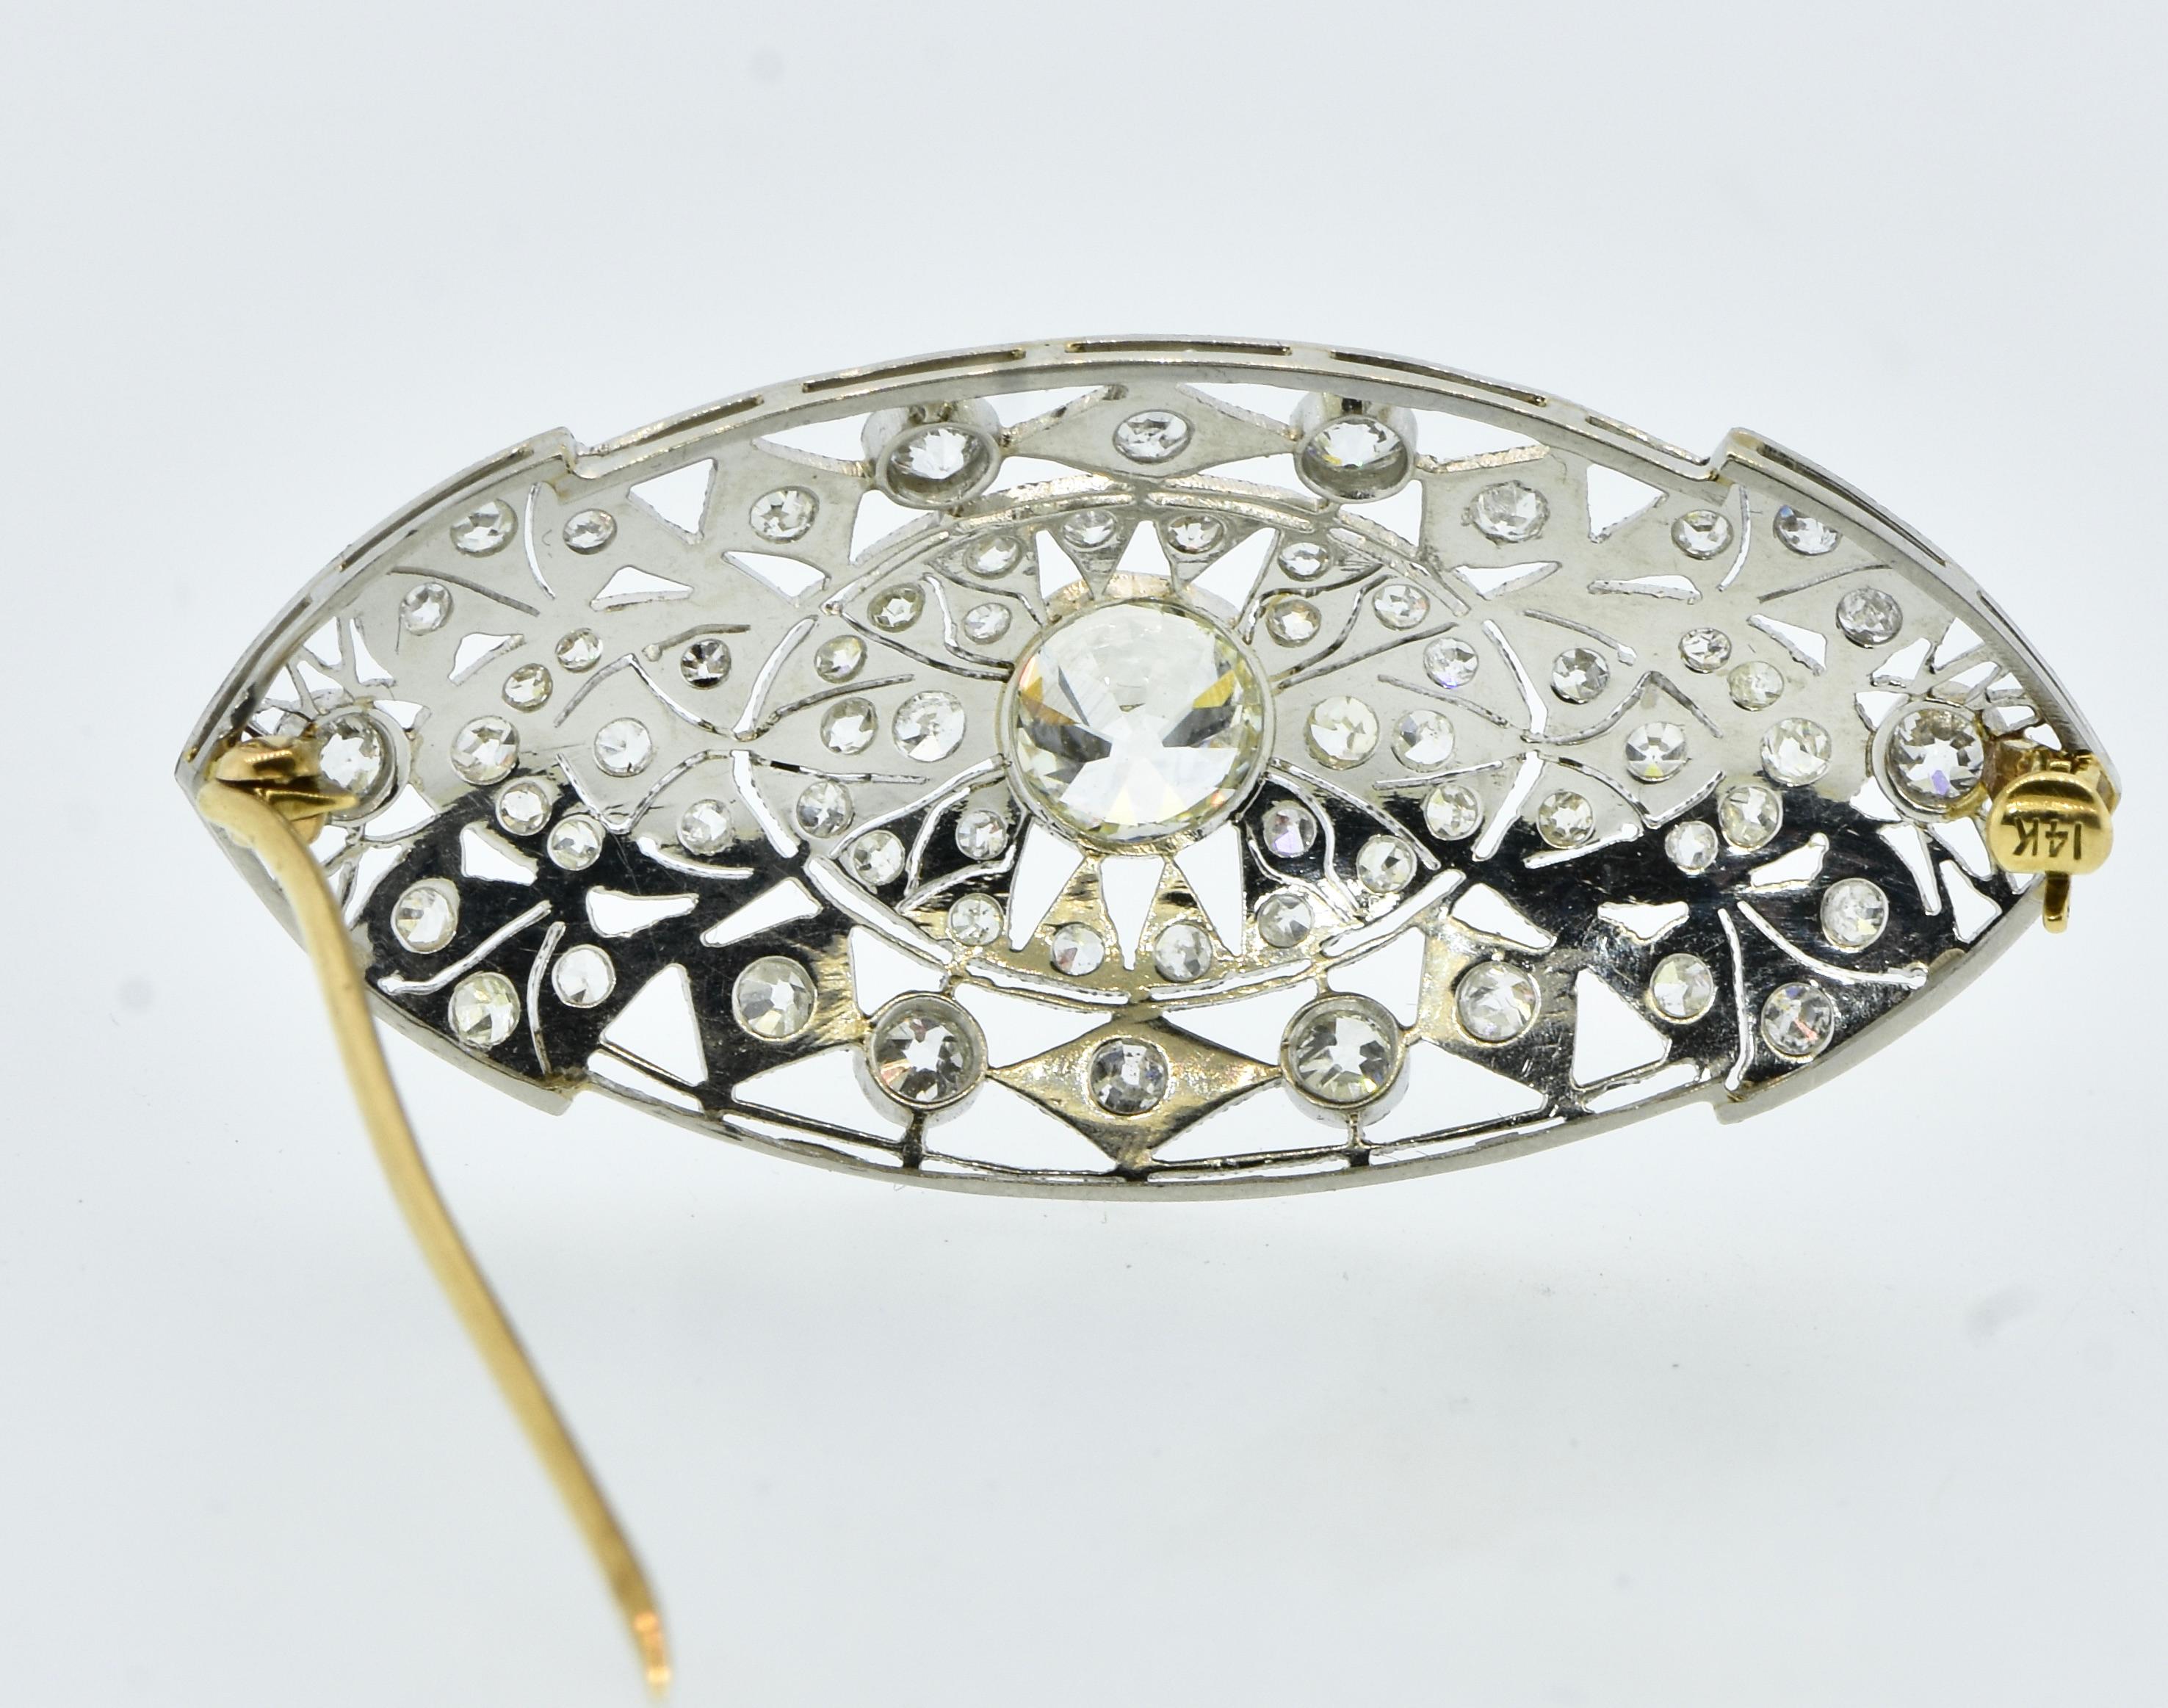 Antique Platinum and Diamond, 2.76 cts, Large and Substantial Brooch, circa 1912 For Sale 3